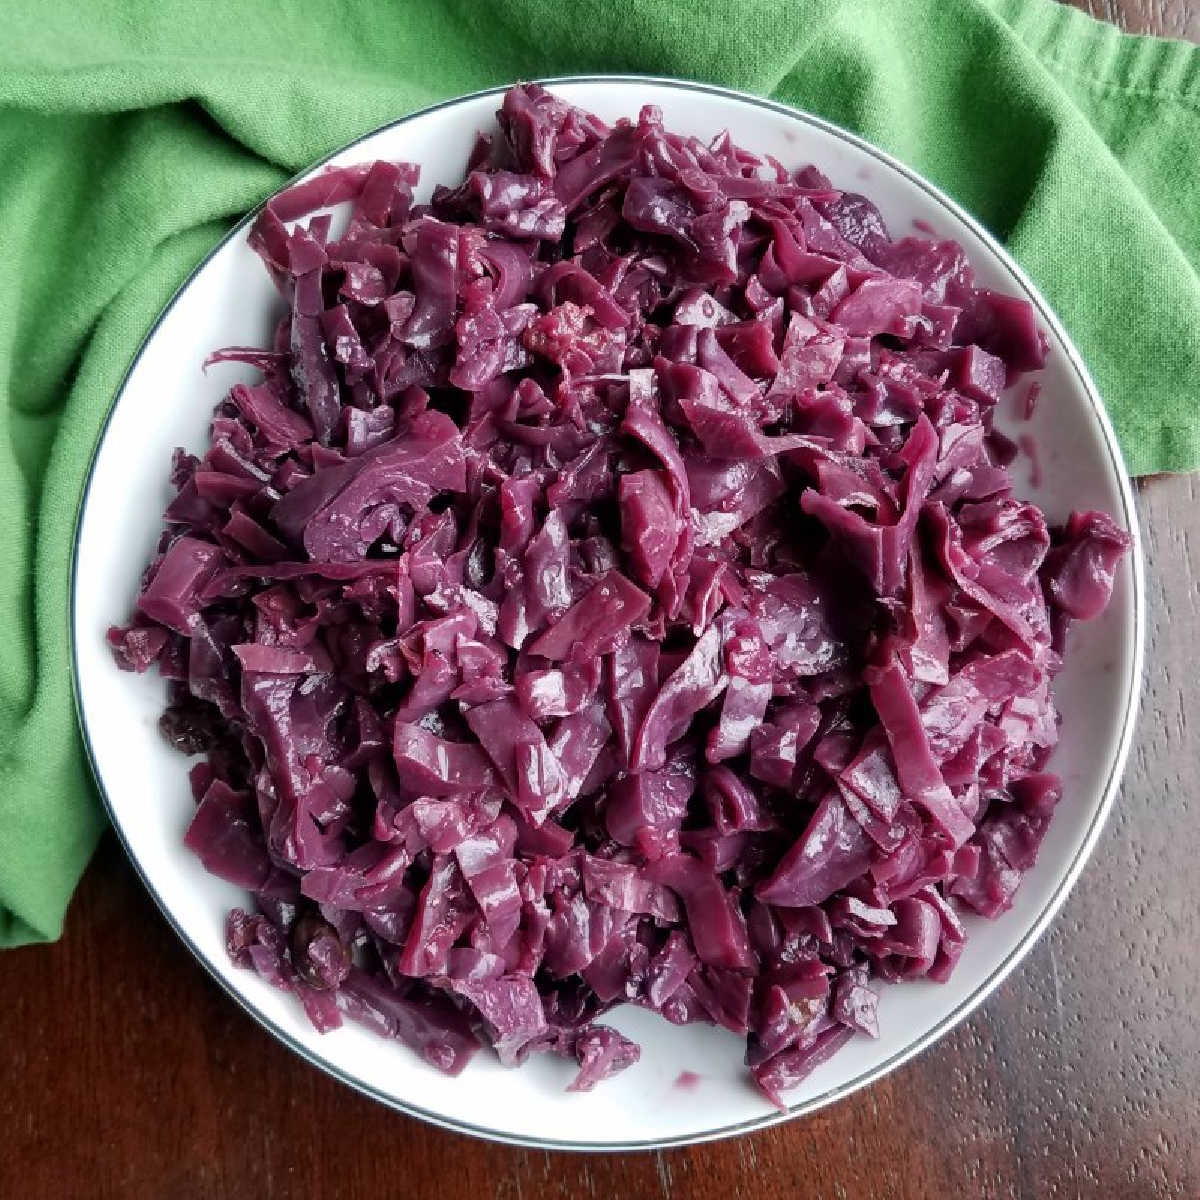 bowlful of braised red cabbage with apples and raisins.